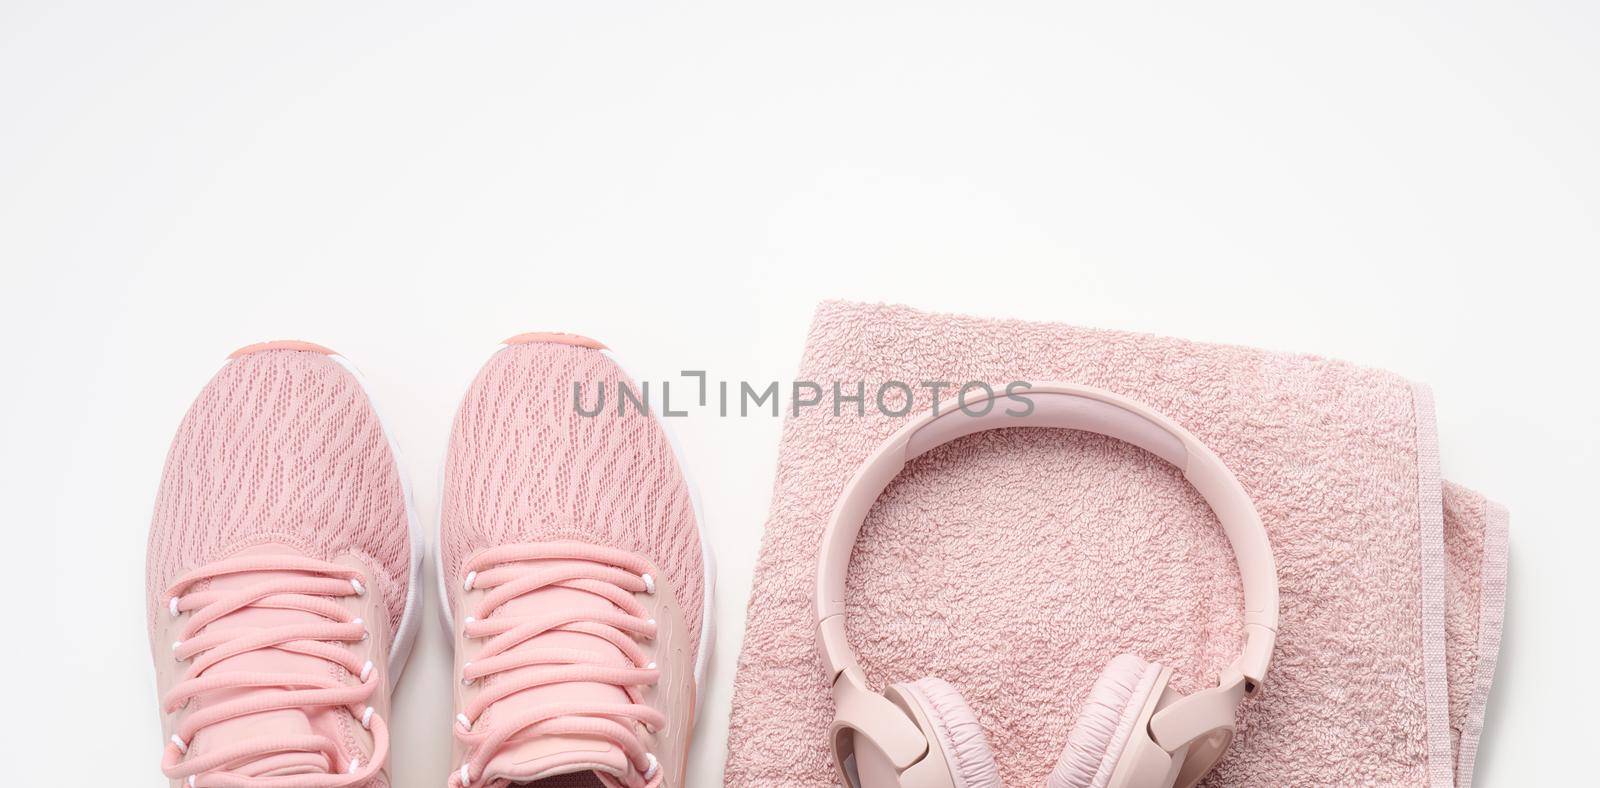 pair of pink textile sneakers, wireless headphones and a textile pink towel on a white background. Set for sports, running